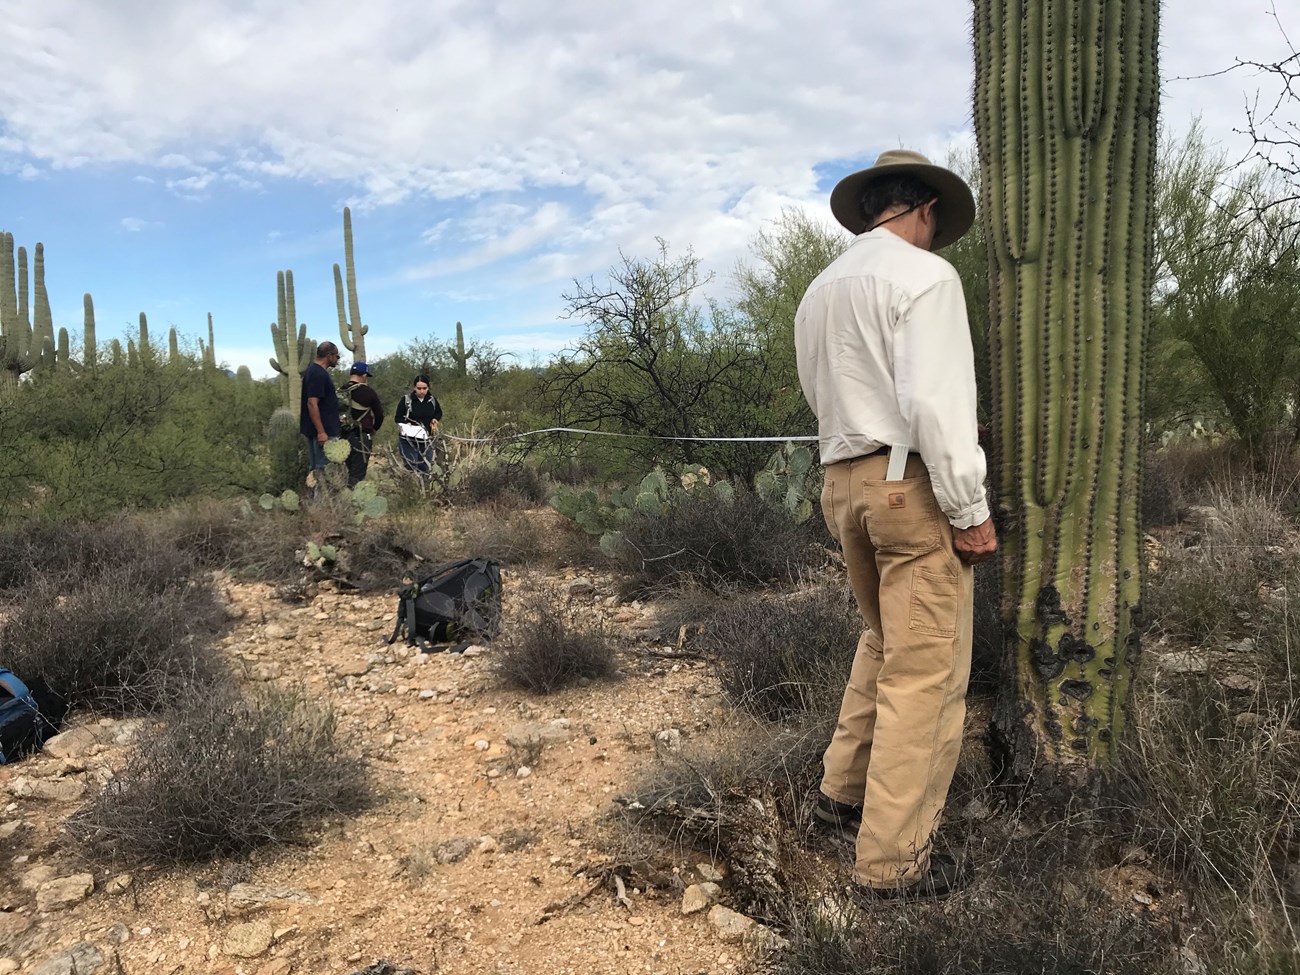 People working together to measure their distance from a saguaro using a measuring tape